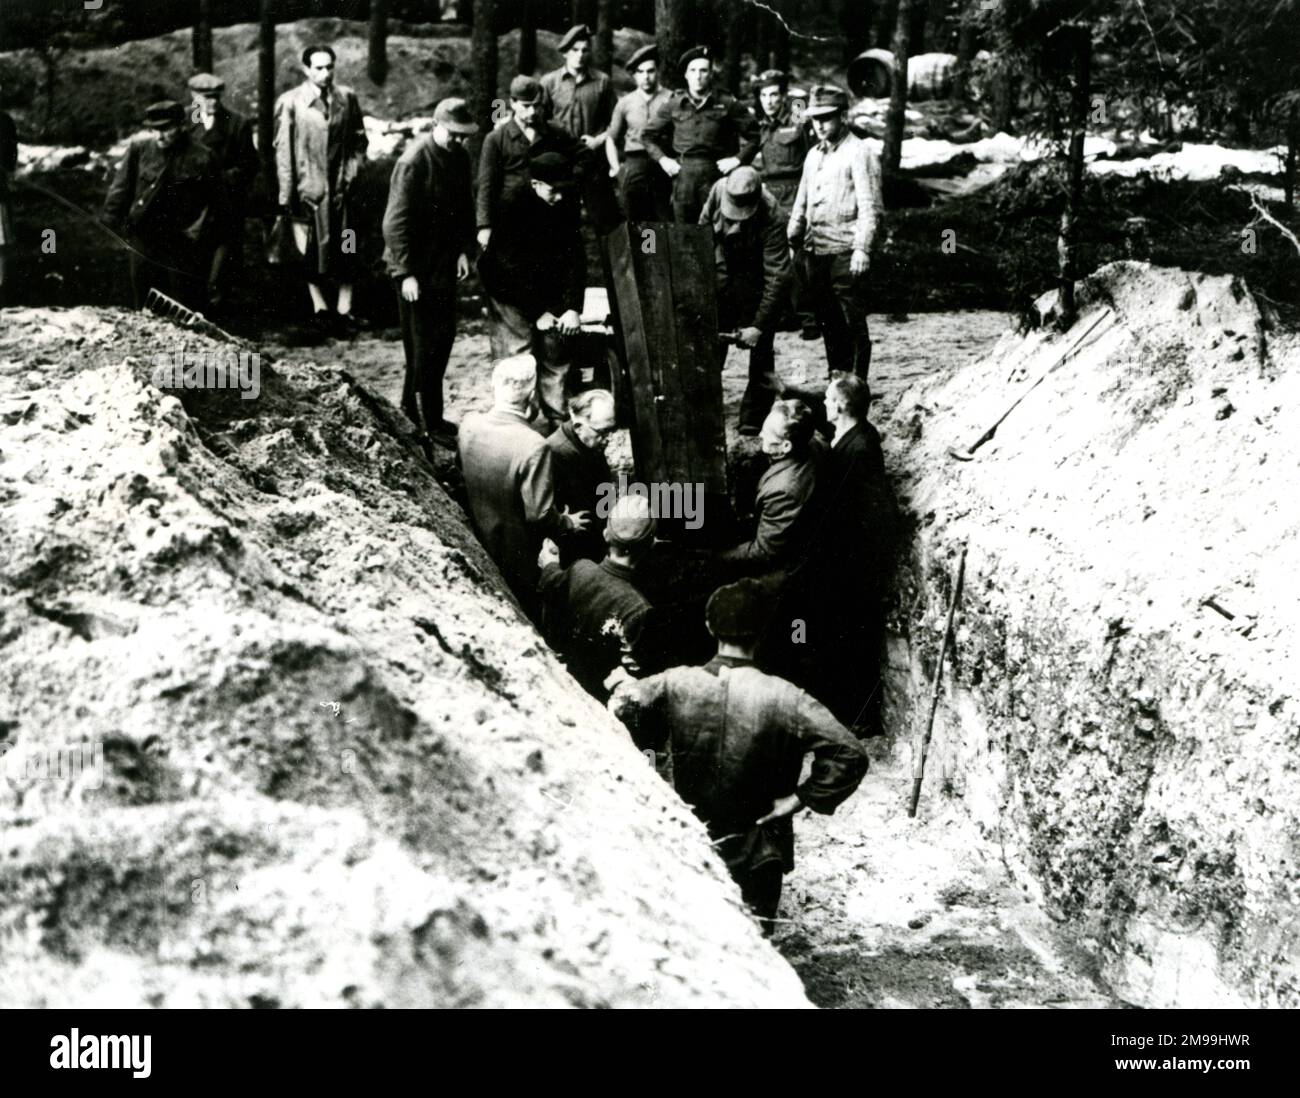 Luneburg, northern Germany, re-burying victims of Nazi atrocities, 3 October 1945. Local Nazi officials were rounded up and made to go to a wood two miles outside Luneburg, carrying the corpses of over 240 victims and giving them a decent burial. Stock Photo